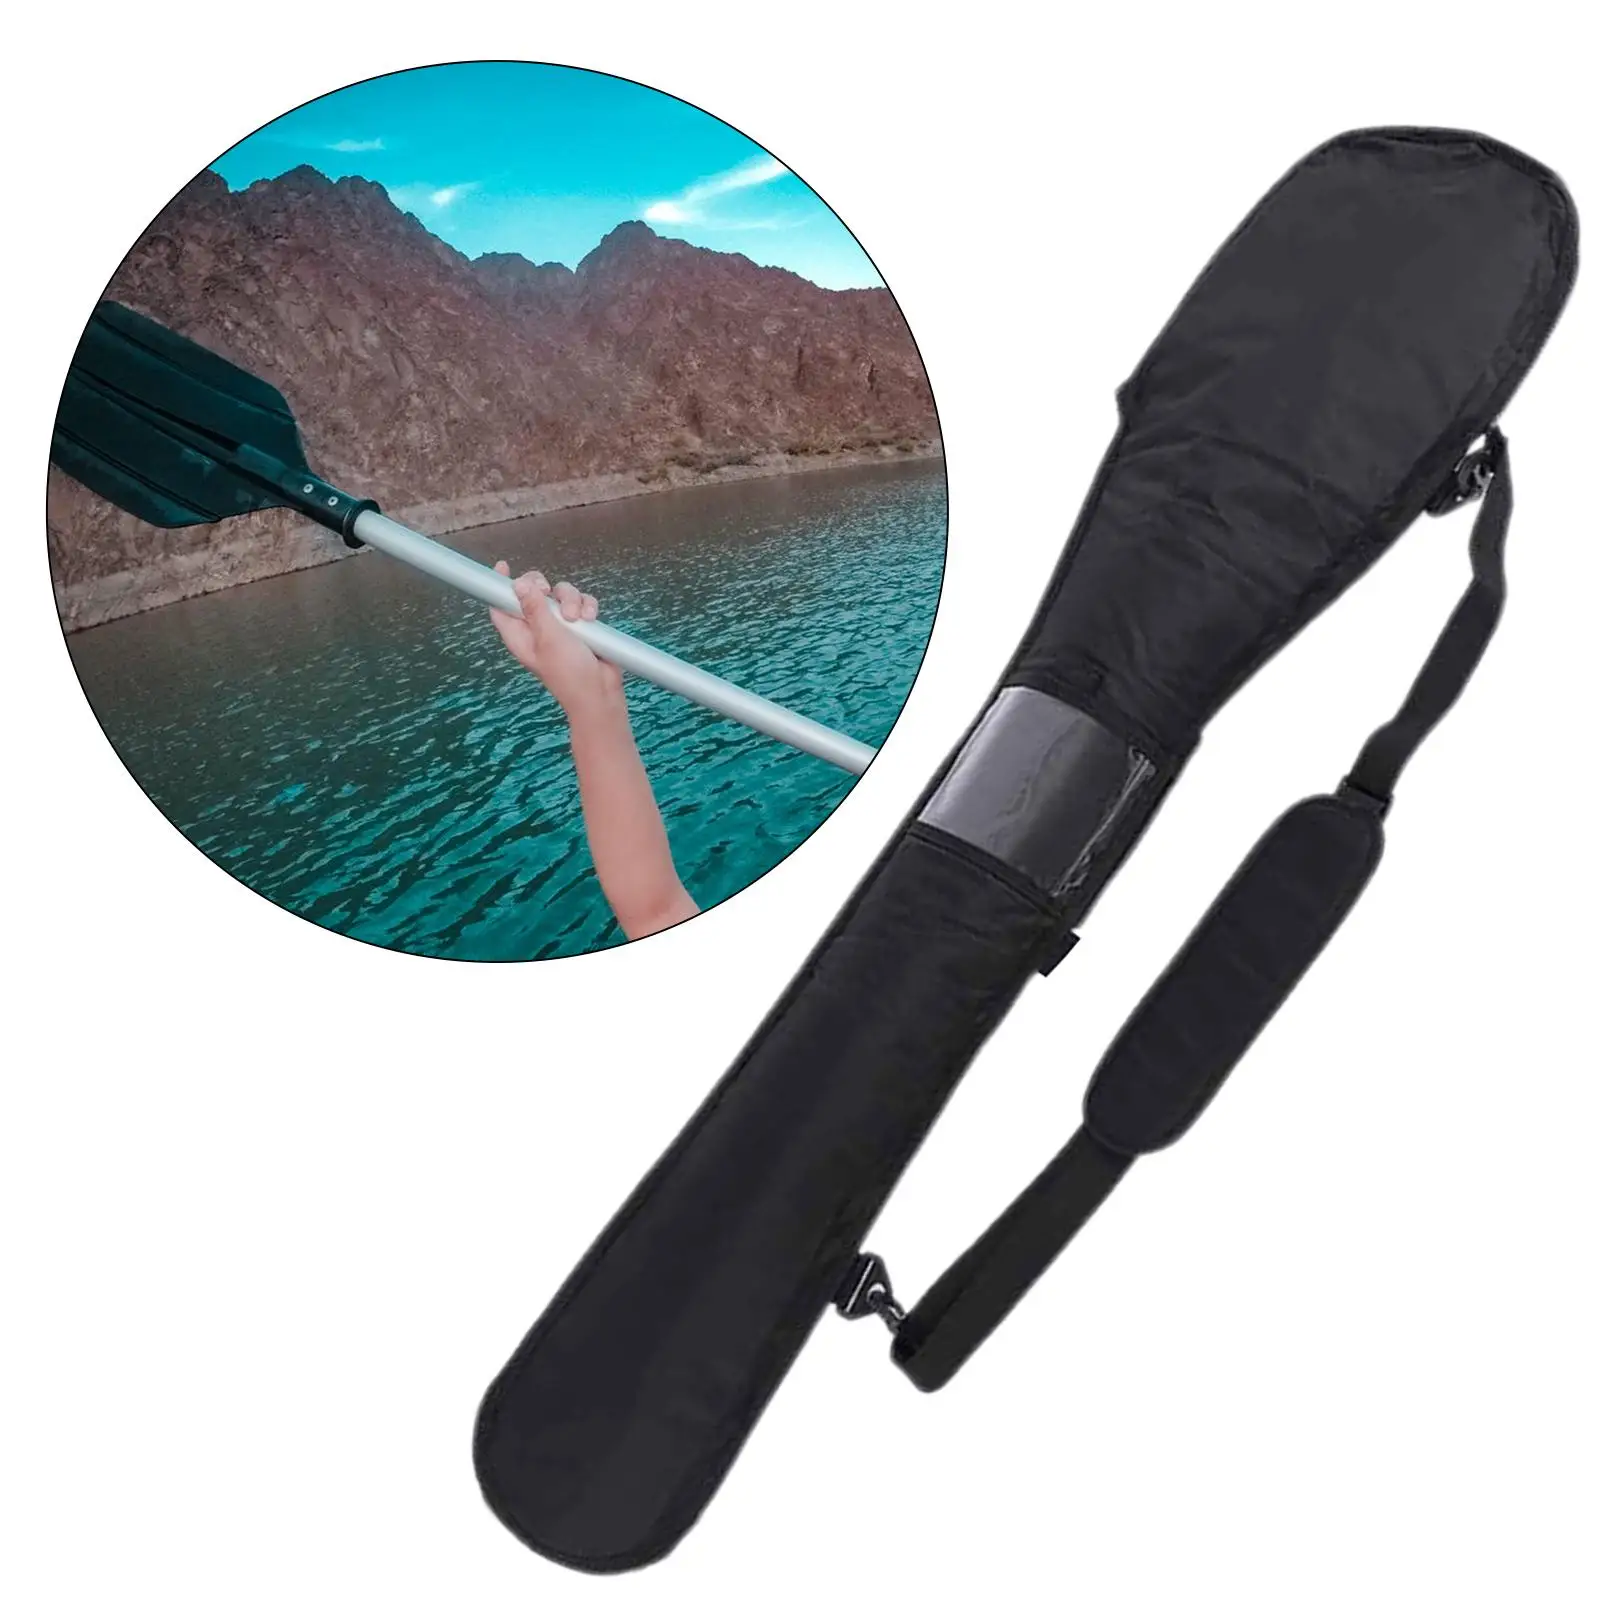 Portable Boat Paddle Pouch Protective Accessory with Adjustable Strap Pocket for Outdoor Canoe Rafting Surfboard